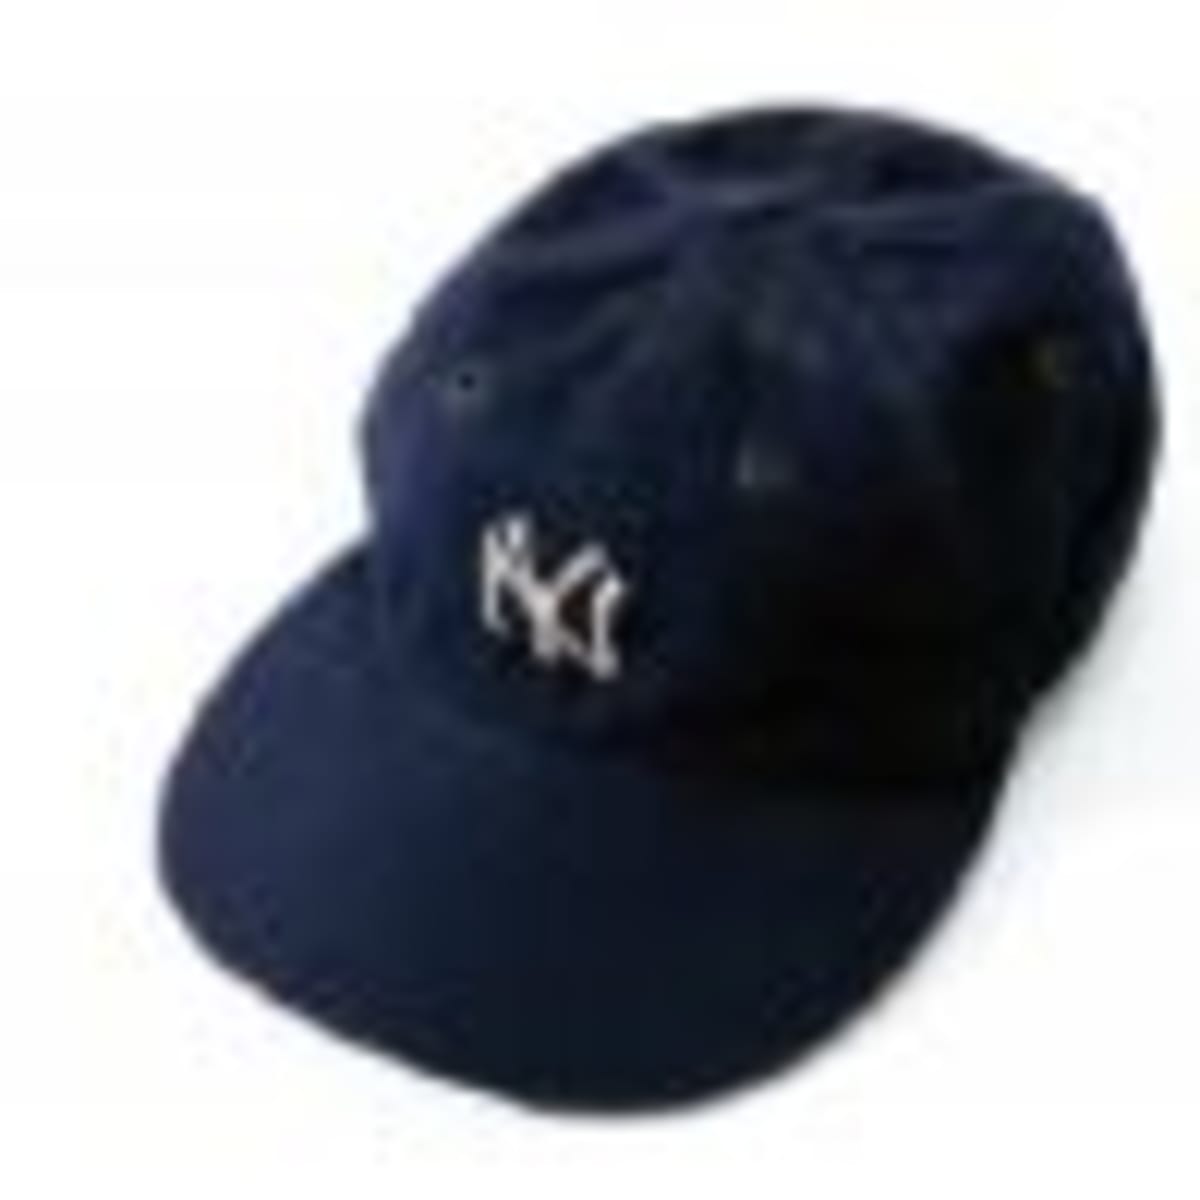 Collectors $225,000, Bidding Babe Cap Digest David Sports by Ongoing Wells - Surpasses Ruth Owned